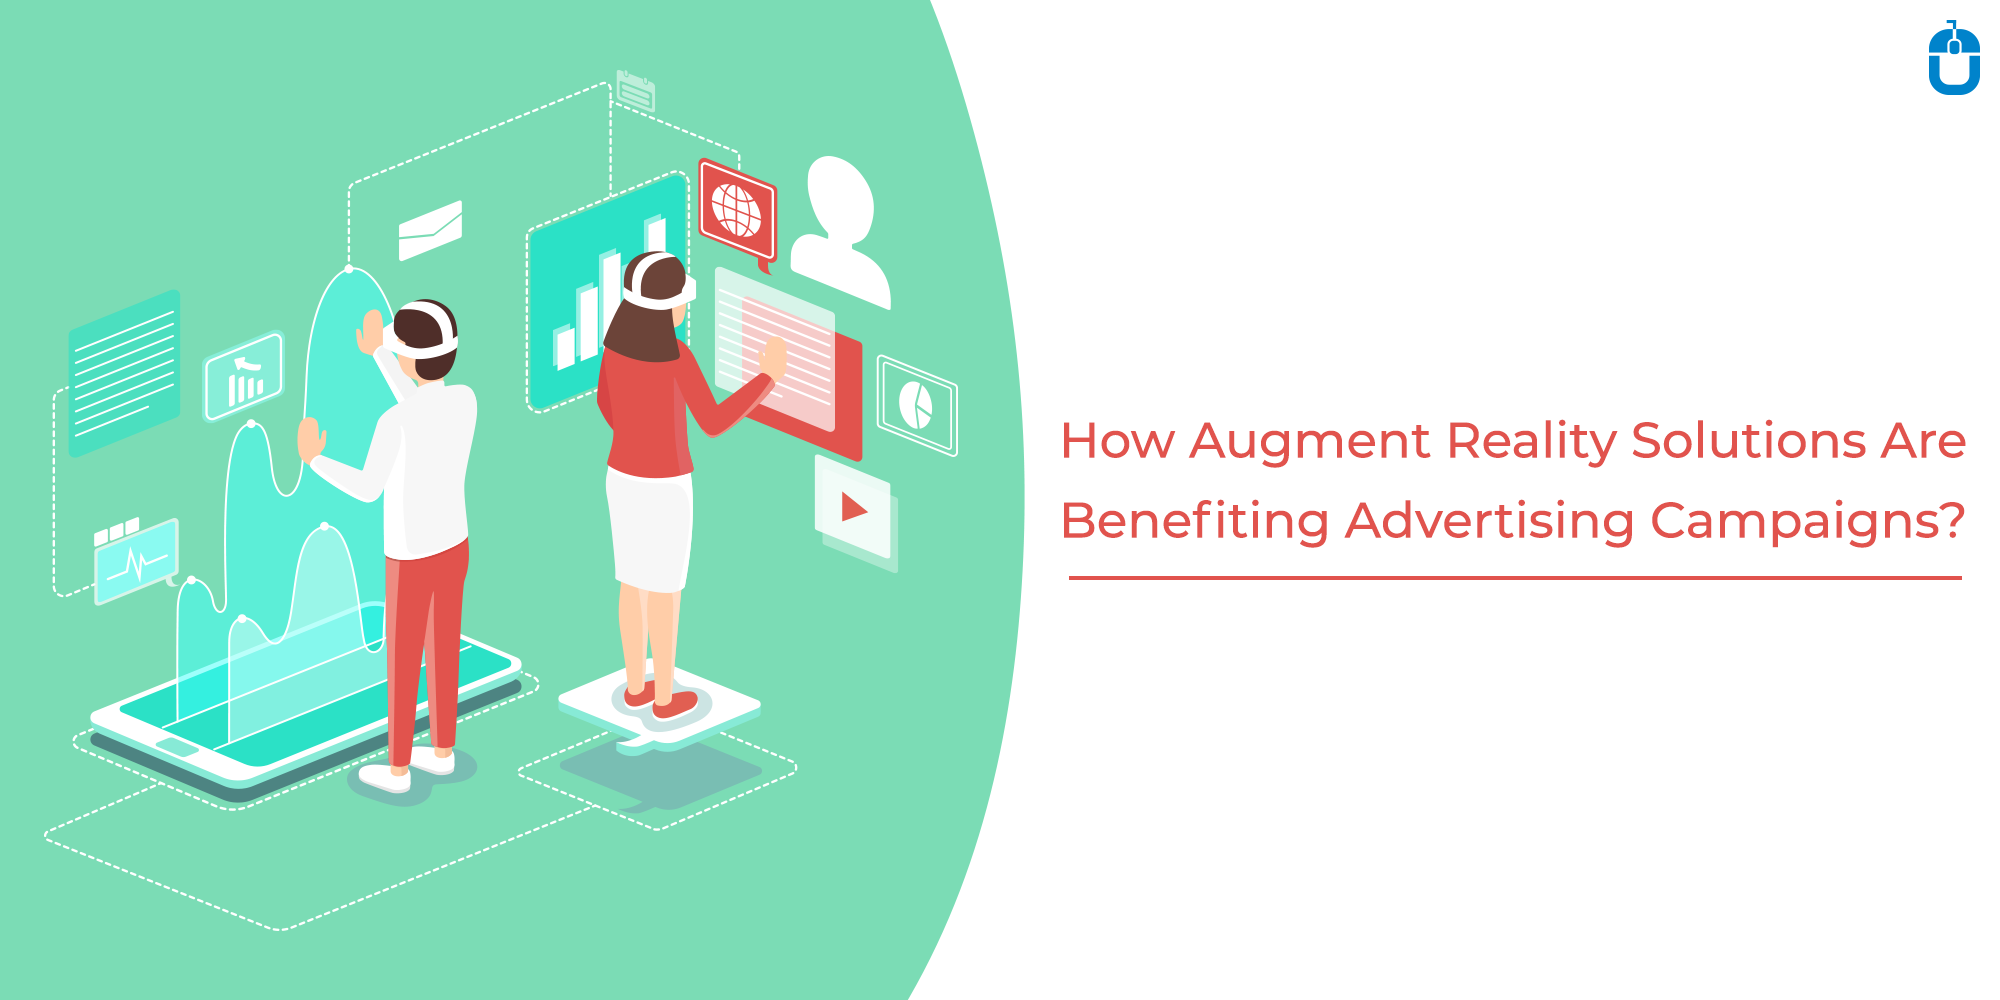 How Augment Reality Solutions Are Benefiting Advertising Campaigns?